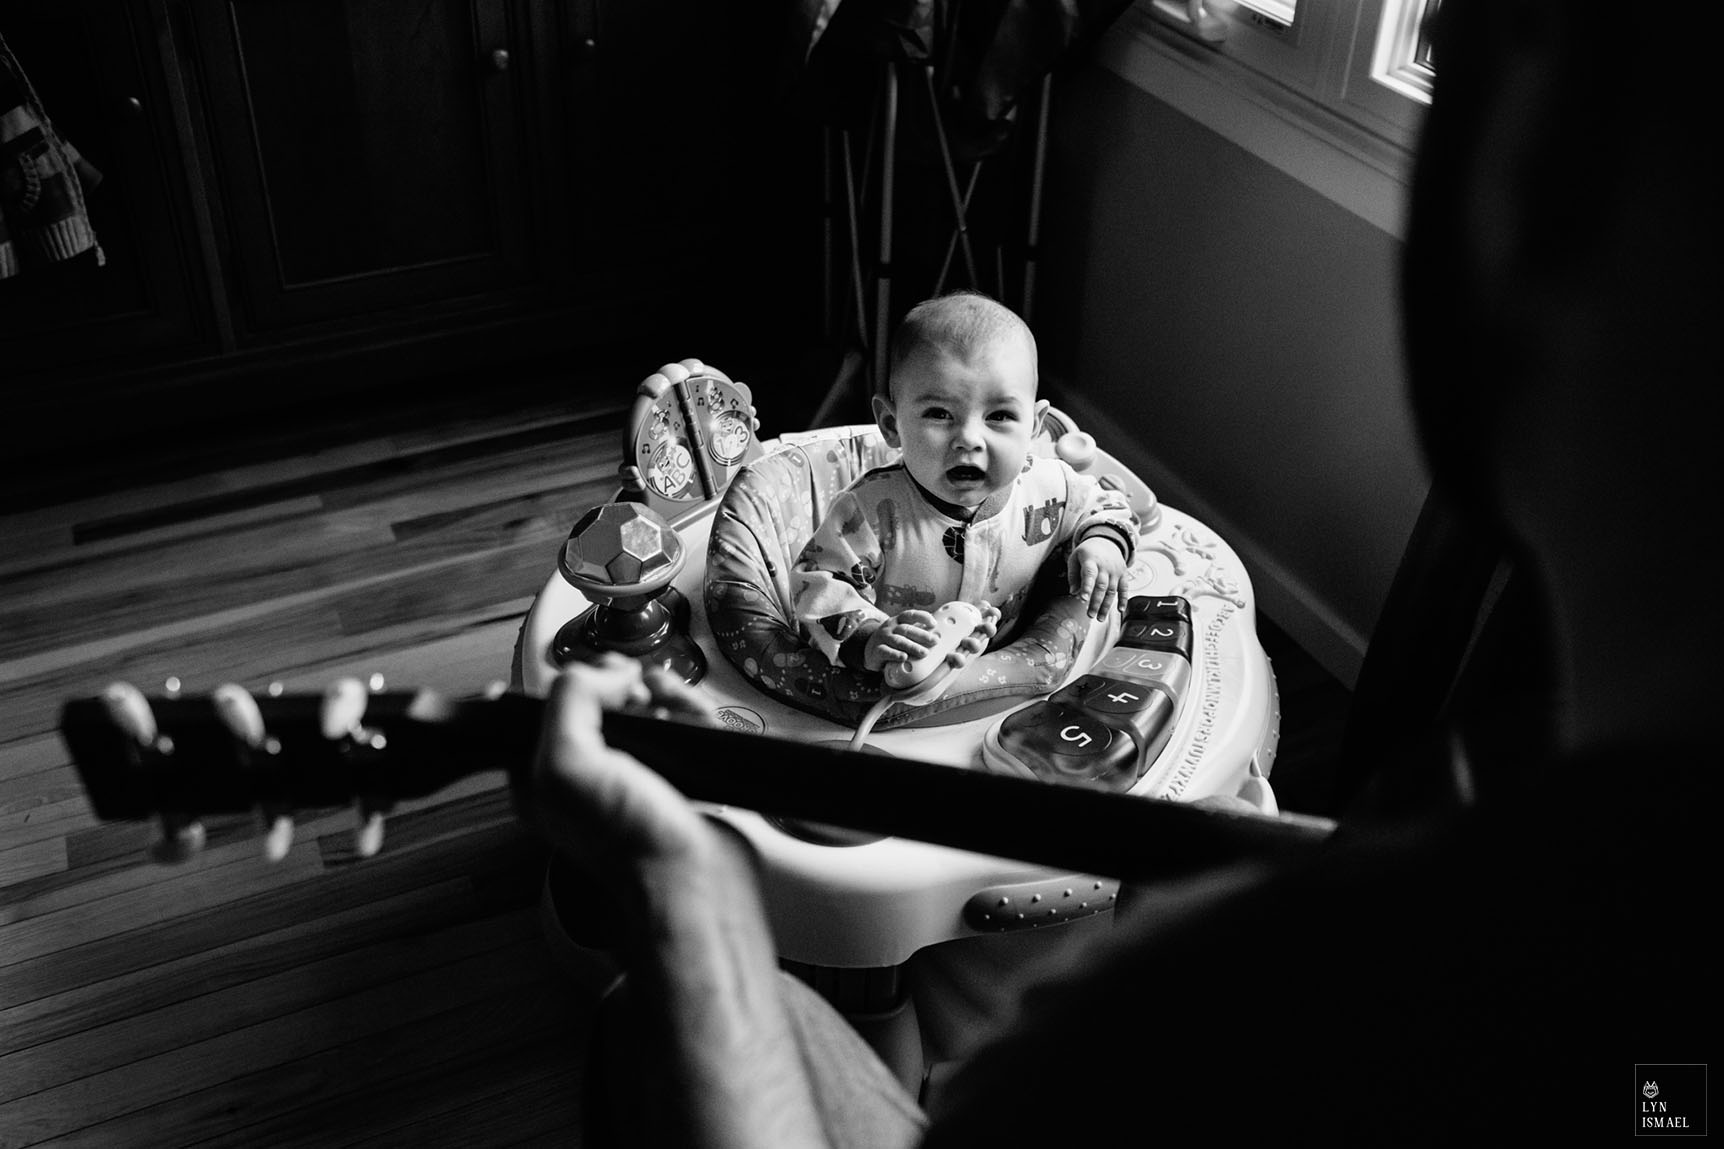 Kitchener family documentary photographer captures a kid crying as his father plays the guitar